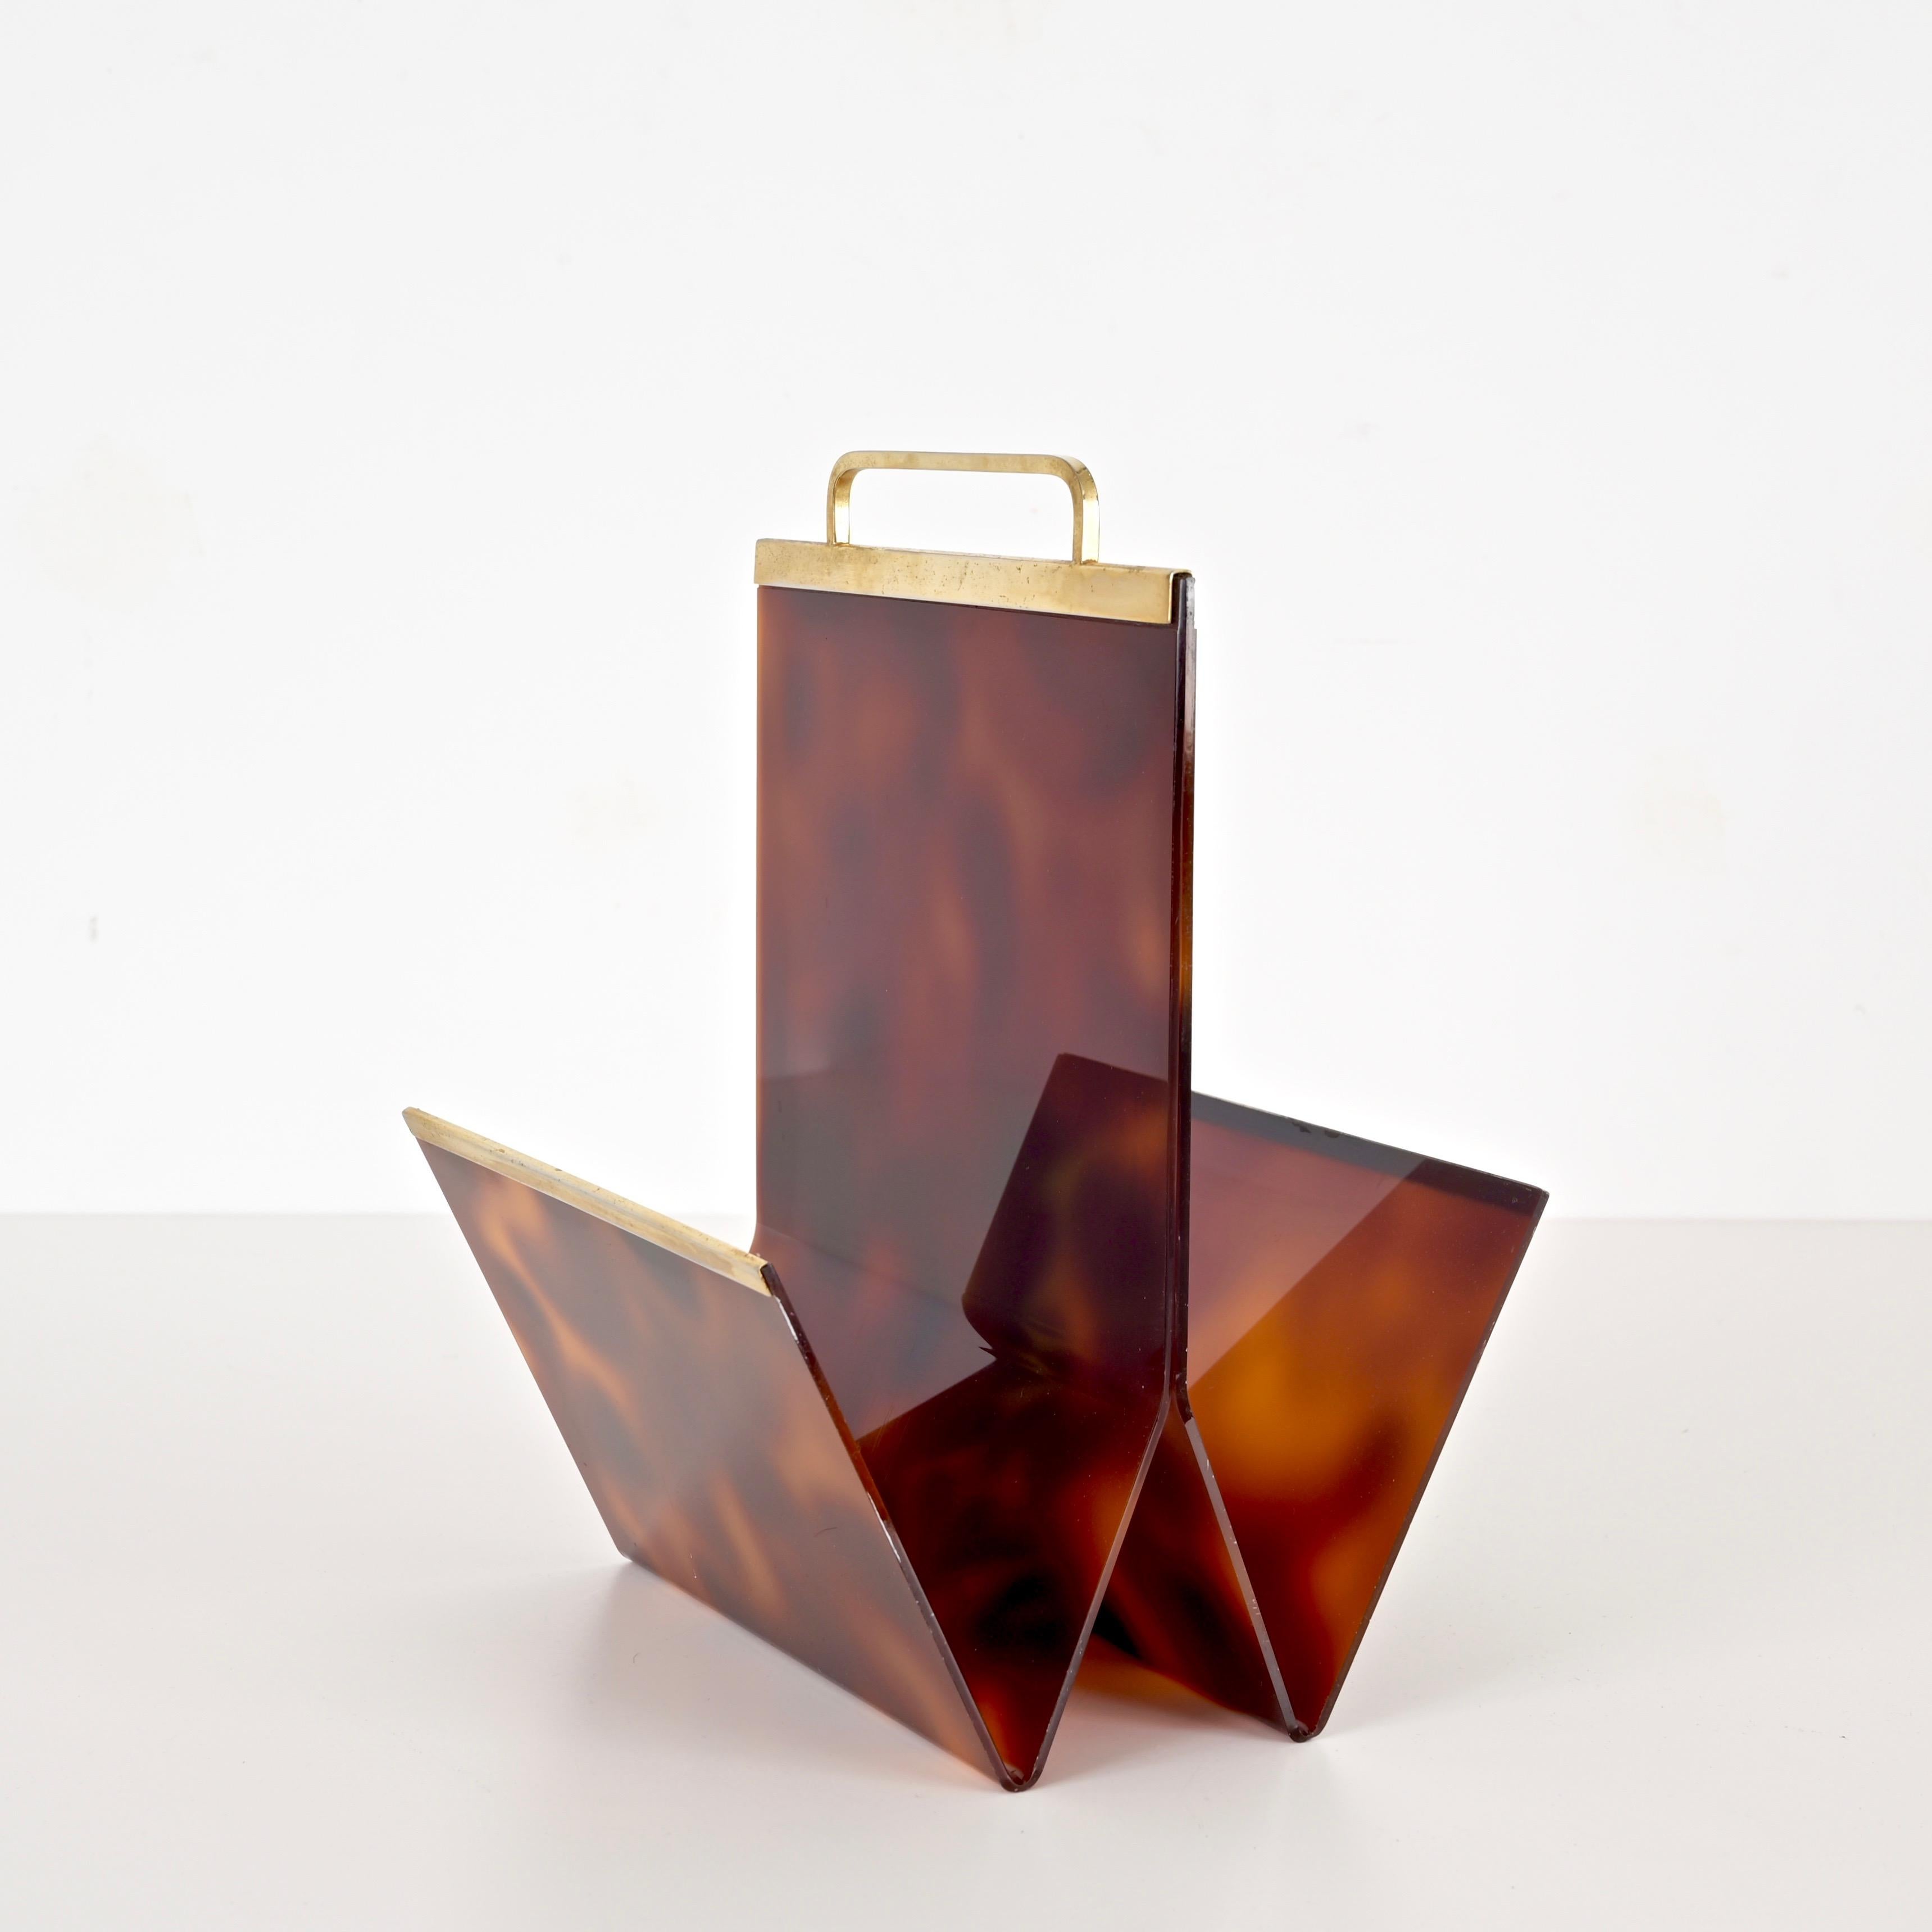 Hand-Crafted Alpac Midcentury Tortoiseshell Lucite and Brass Magazine Rack, Dior, France 1970 For Sale